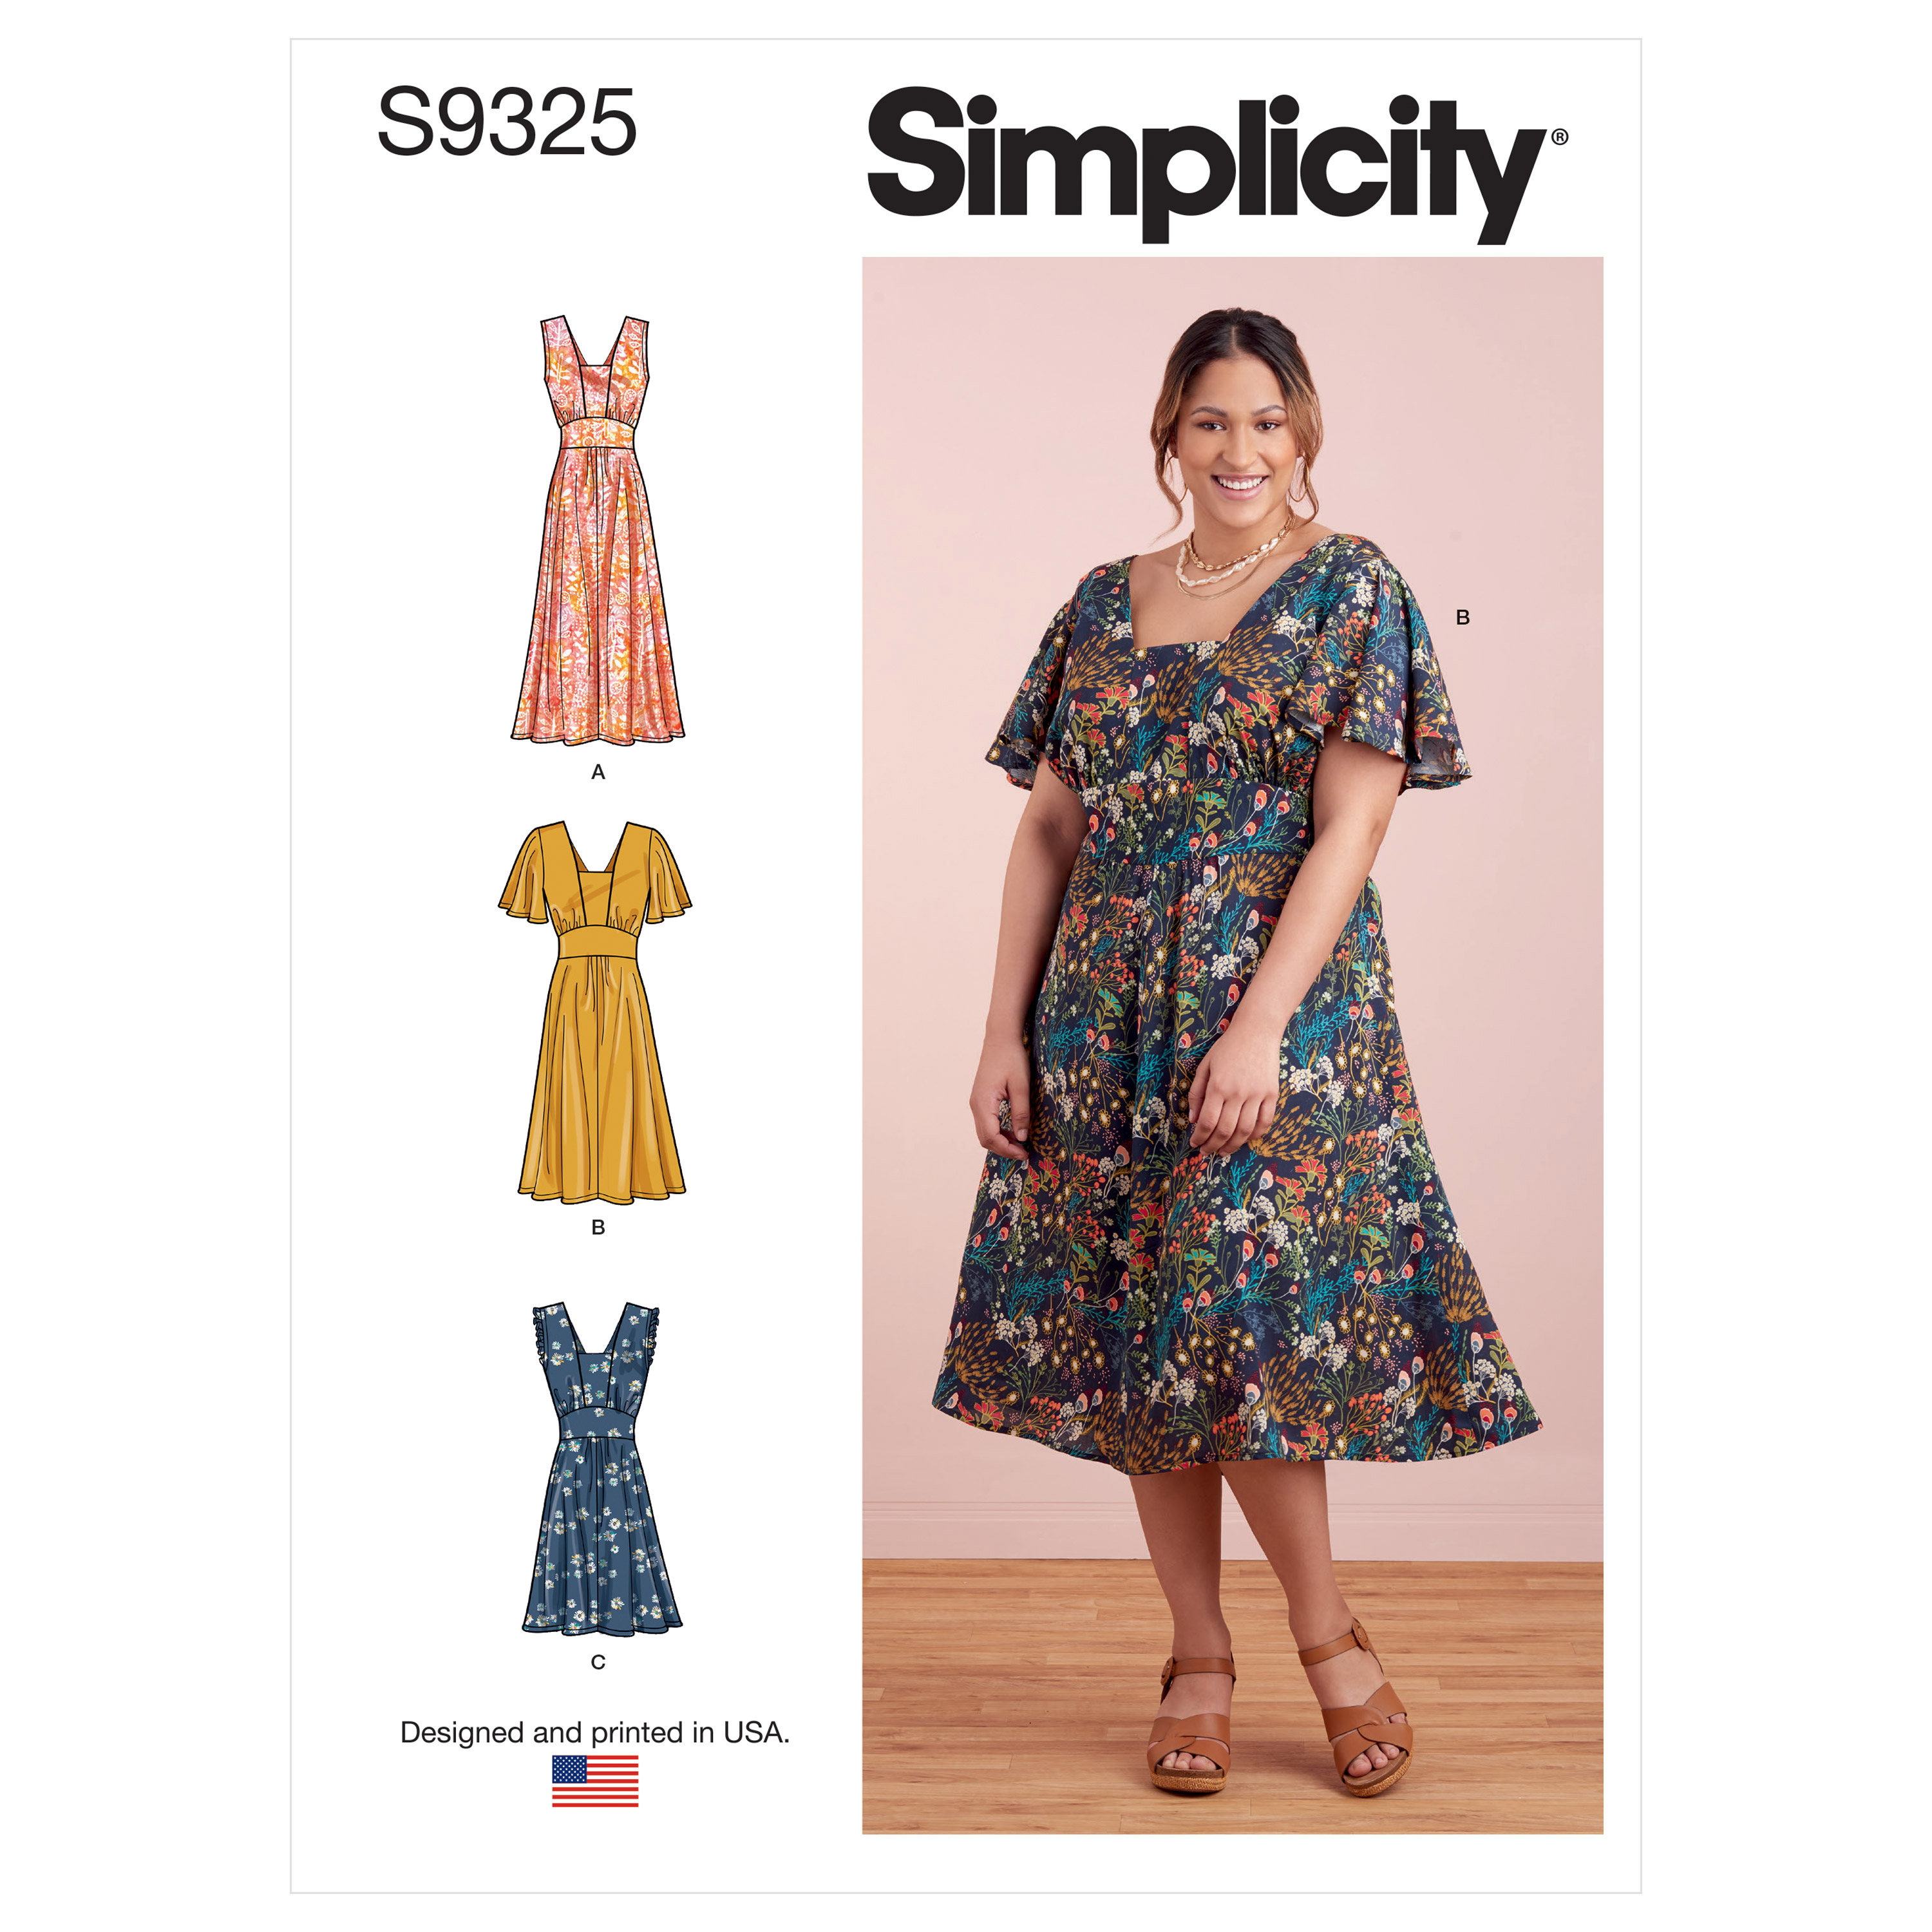 https://images.patternreview.com/sewing/patterns/simplicity/2021/9325/9325.jpg